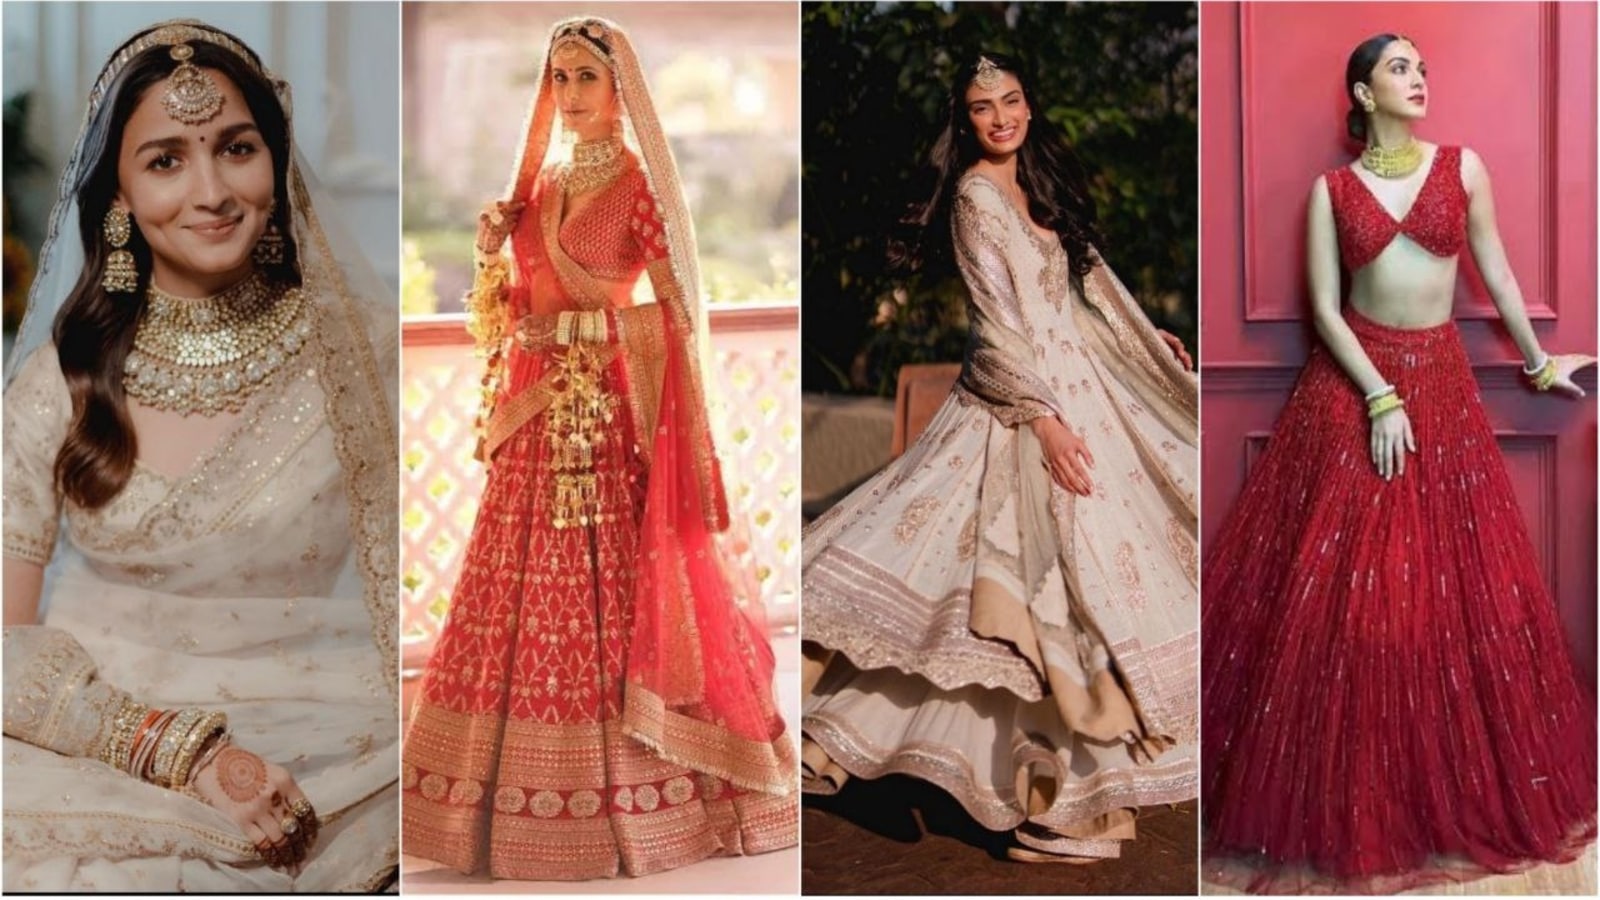 14 Best Places for Wedding Shopping in Delhi to Give You a Head Start |  Bridal and Groom's Wear | Wedding Blog